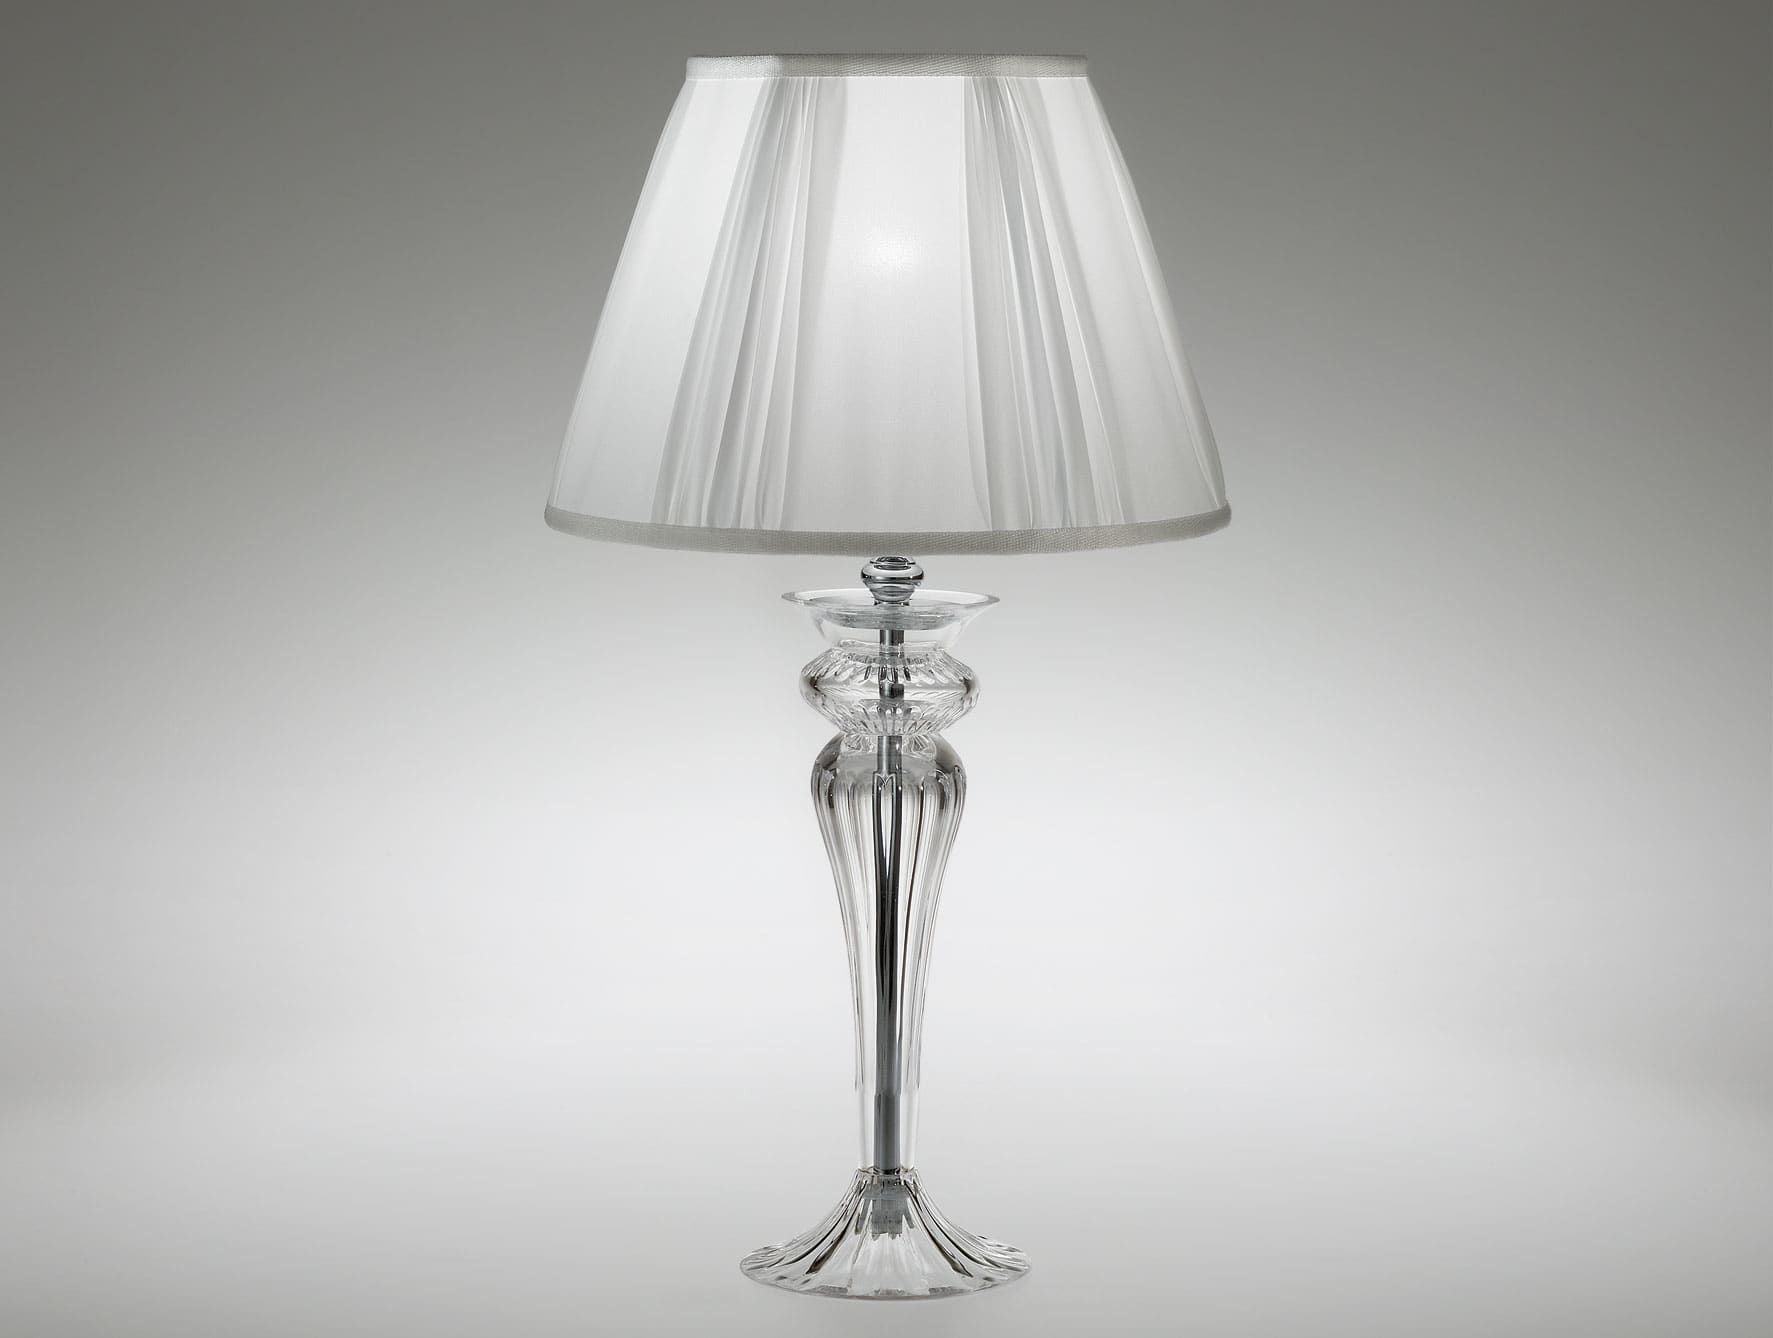 8111 modern Italian table lamp with clear glass